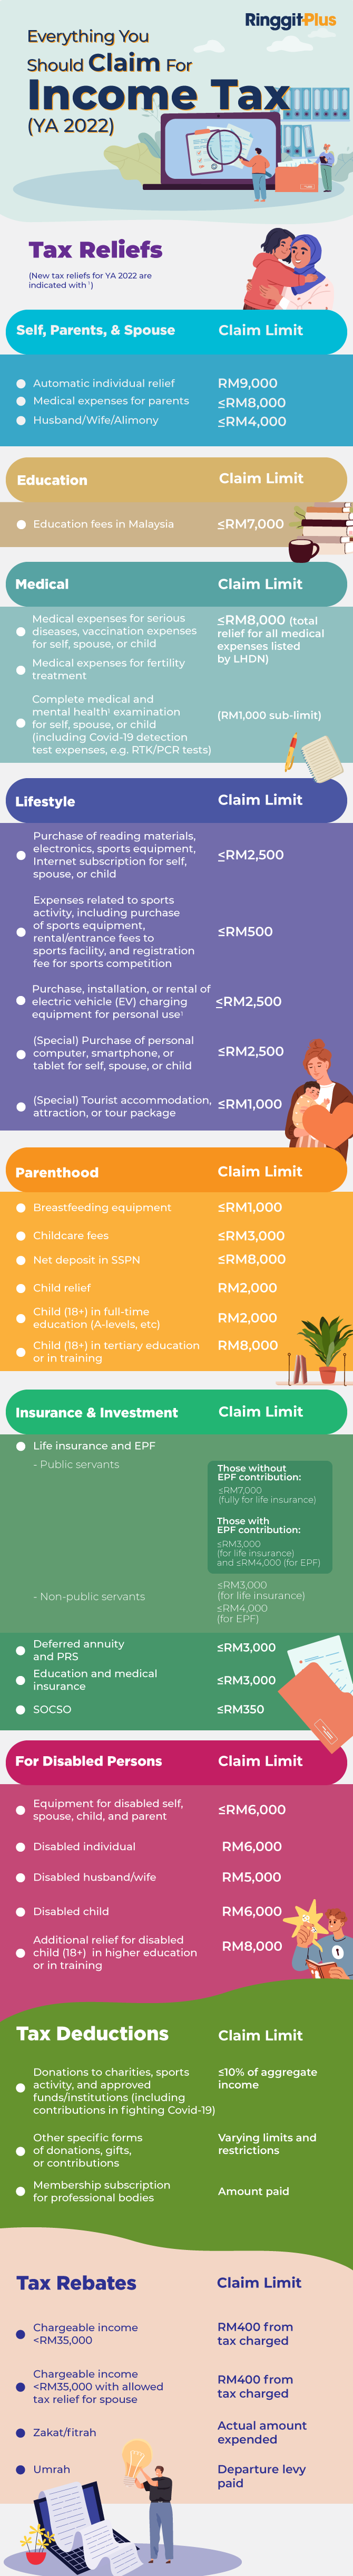 everything-you-should-claim-as-income-tax-relief-malaysia-2023-ya-2022